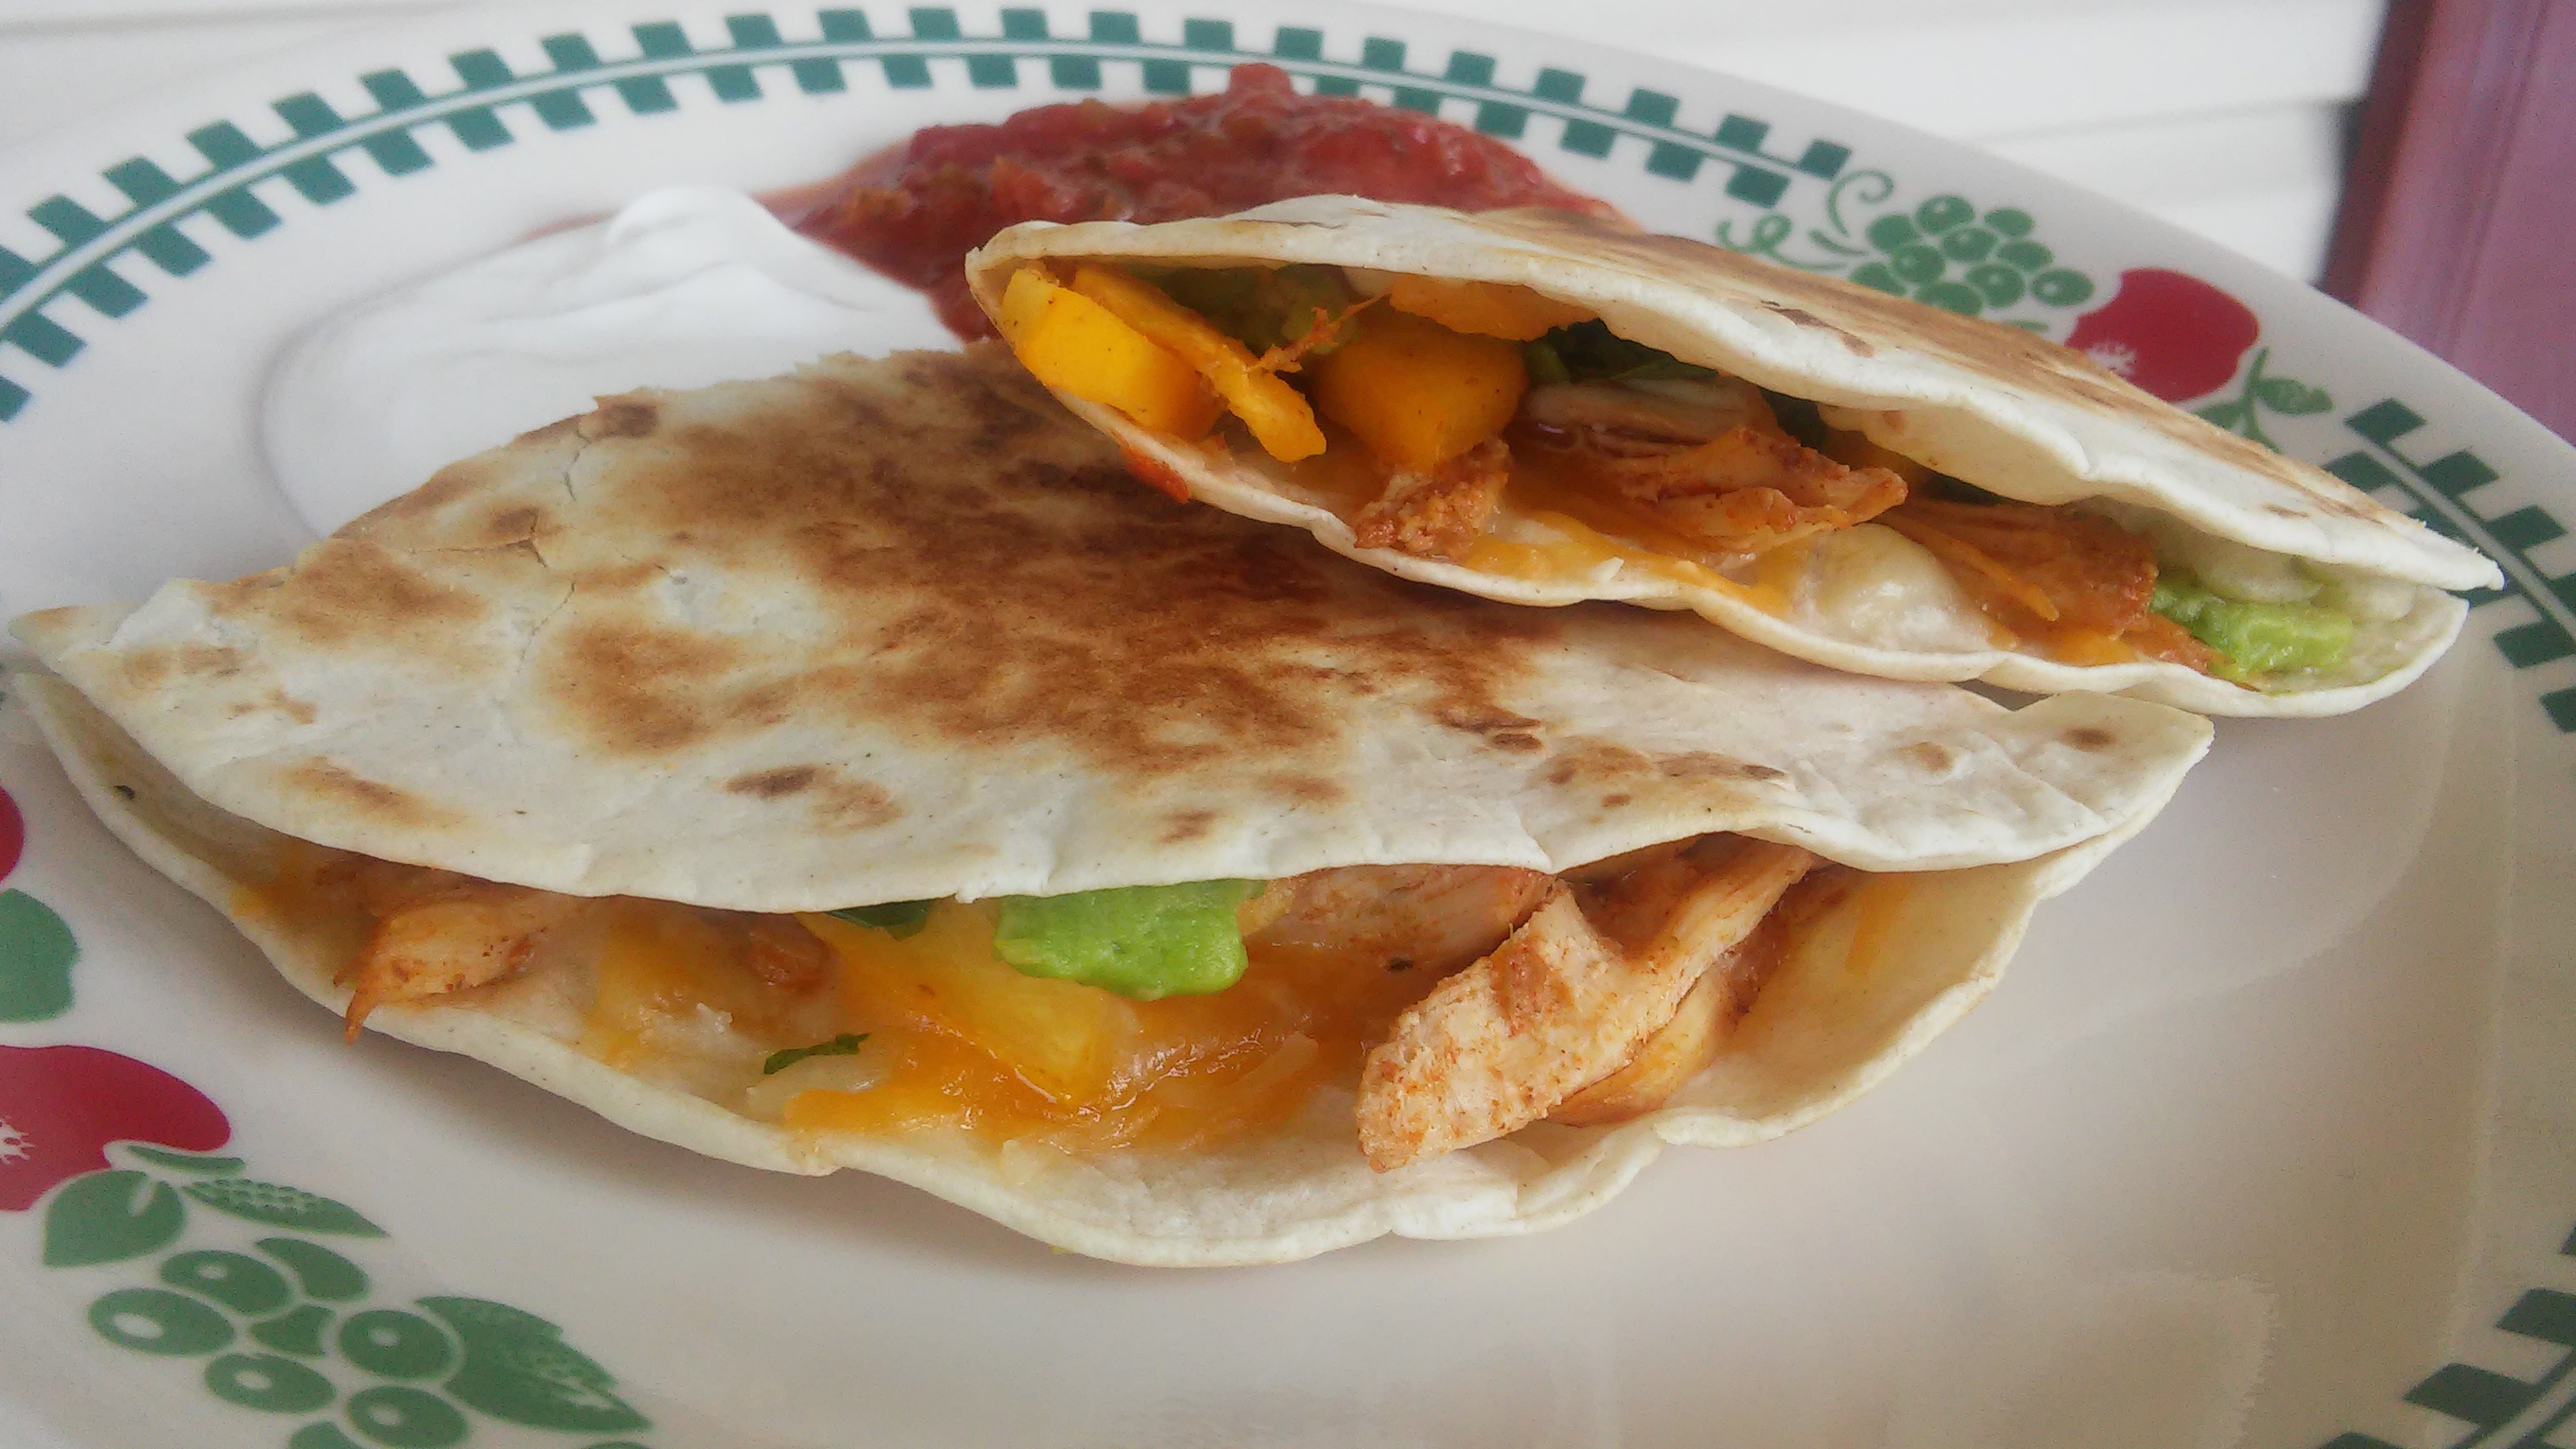 Chicken and Vegetable Quesadillas